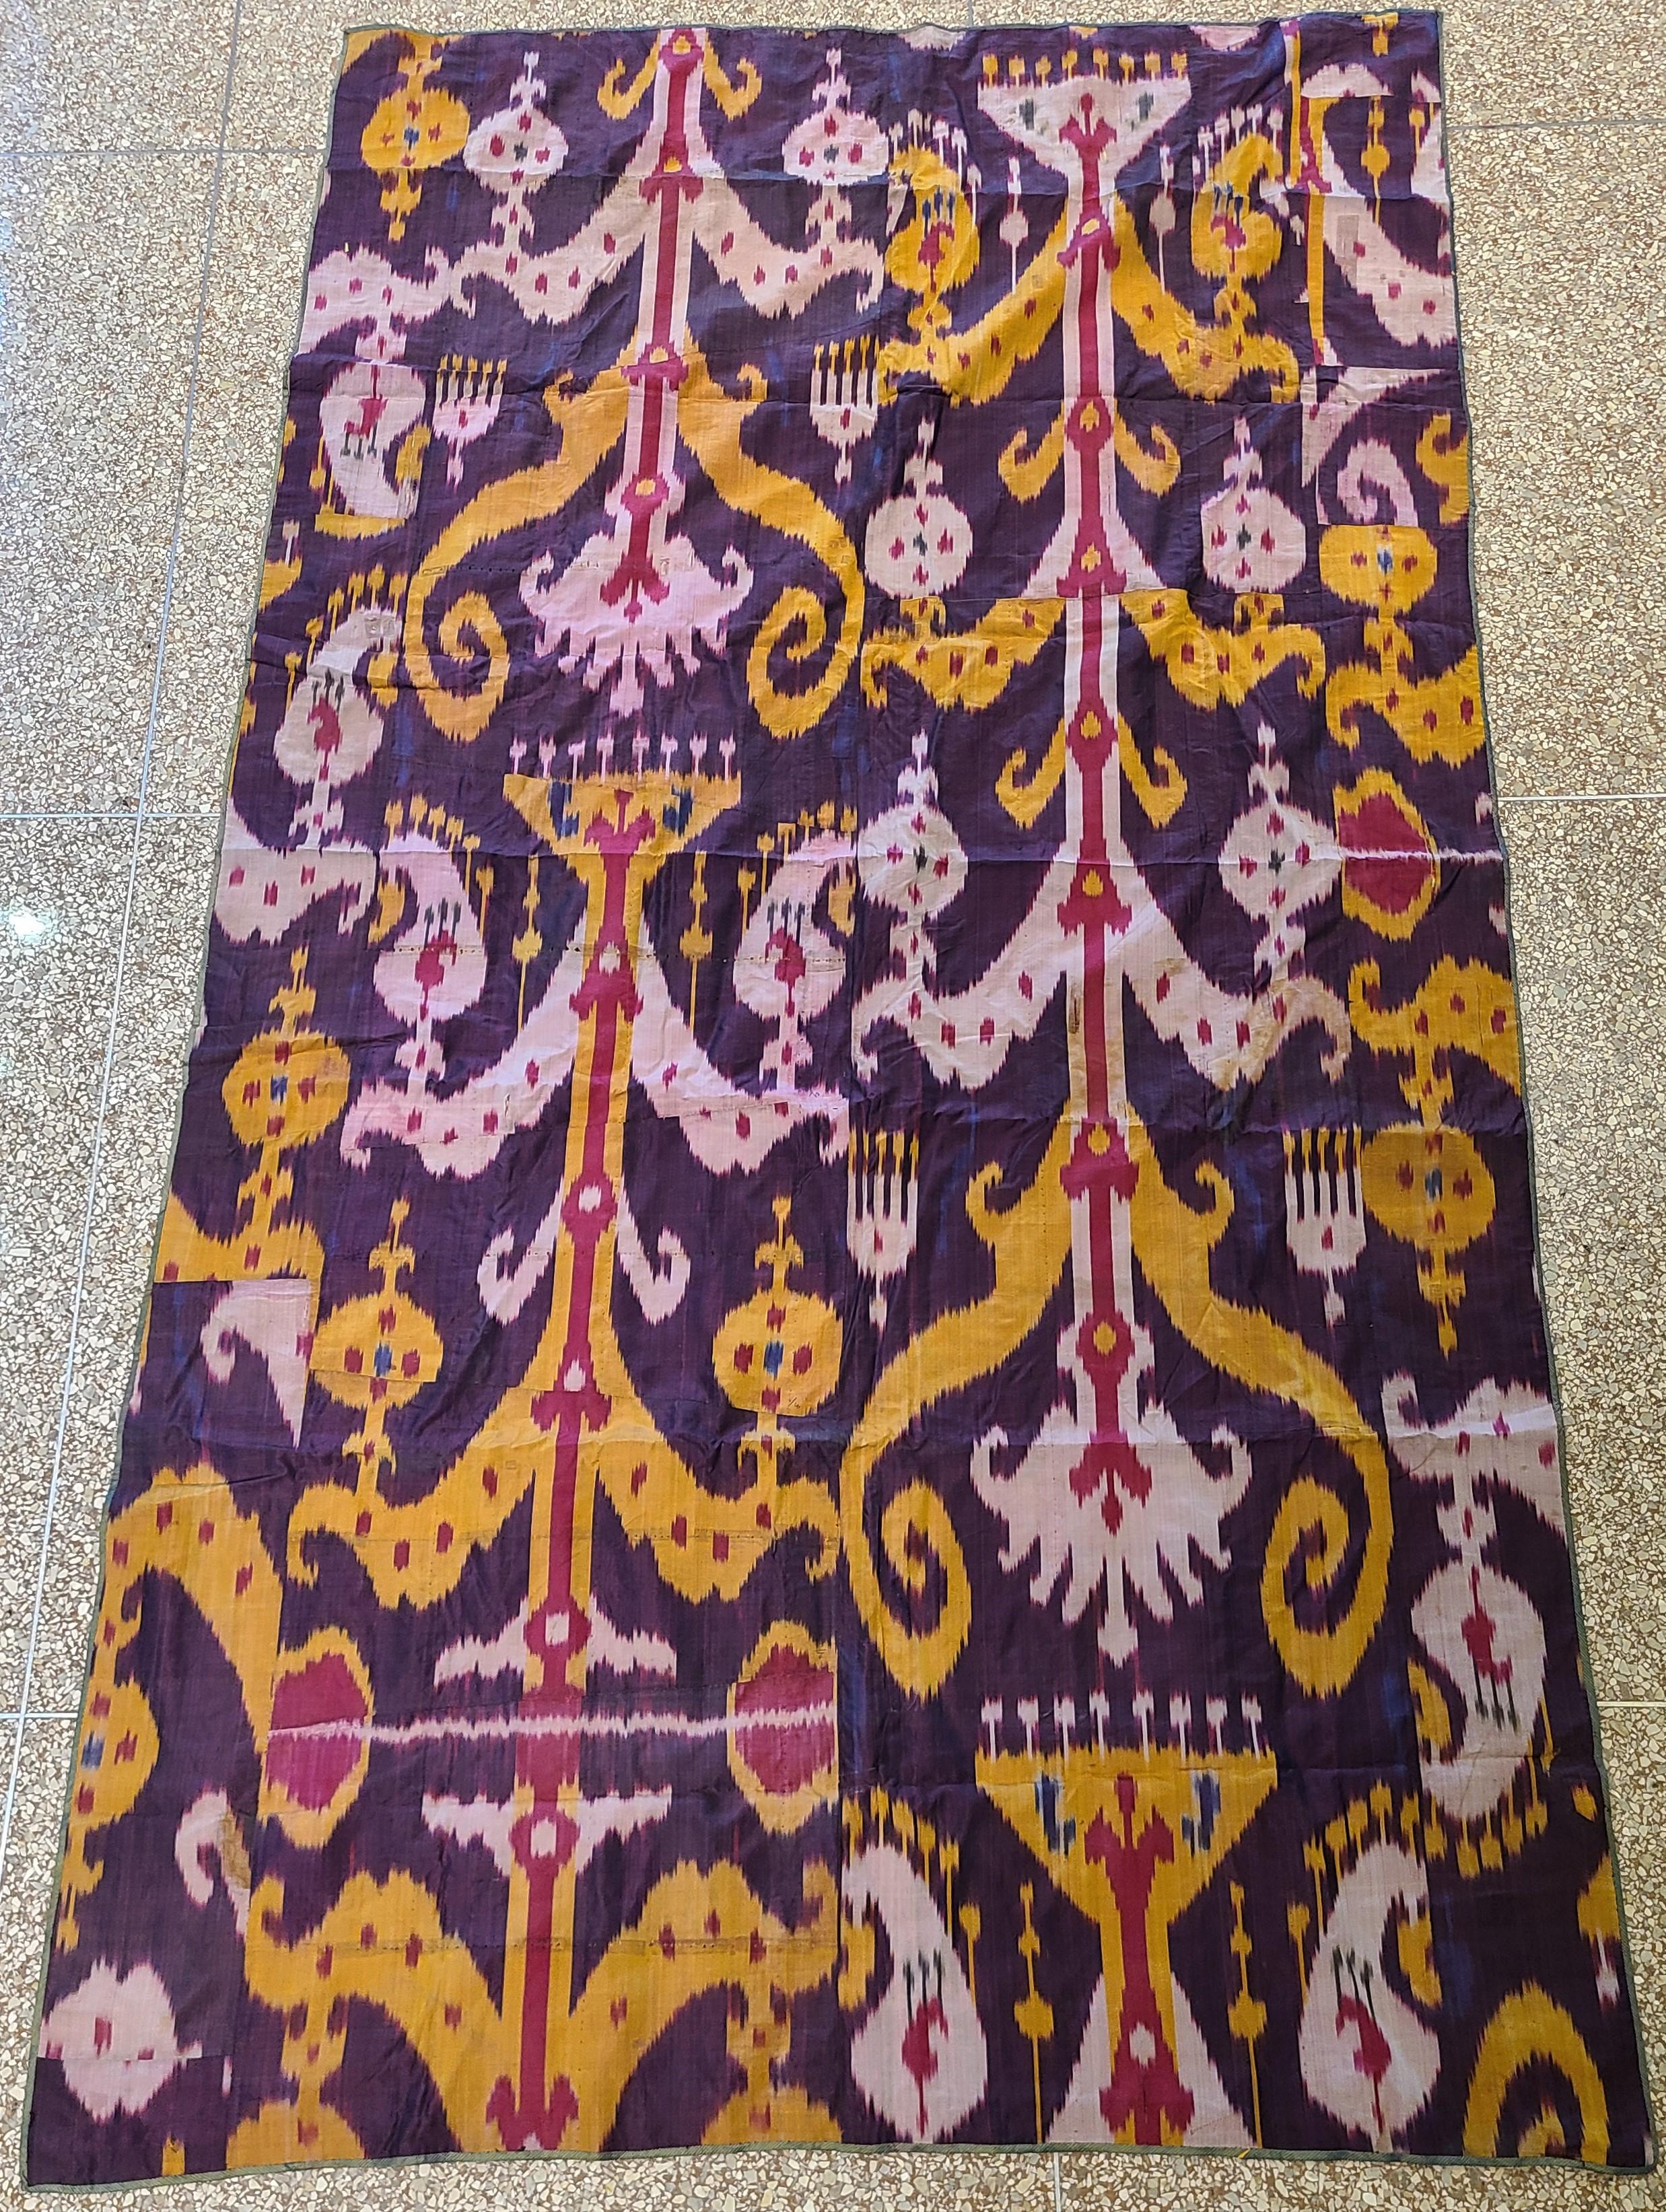 An antique 19th century Russian Uzbek five-color pure silk wrapped tribal weaving ikat, with original Russian Roller Printed cotton backing/lining. In fantastic condition for its age, this ikat is absolutely beautiful with a gorgeous five-colorway